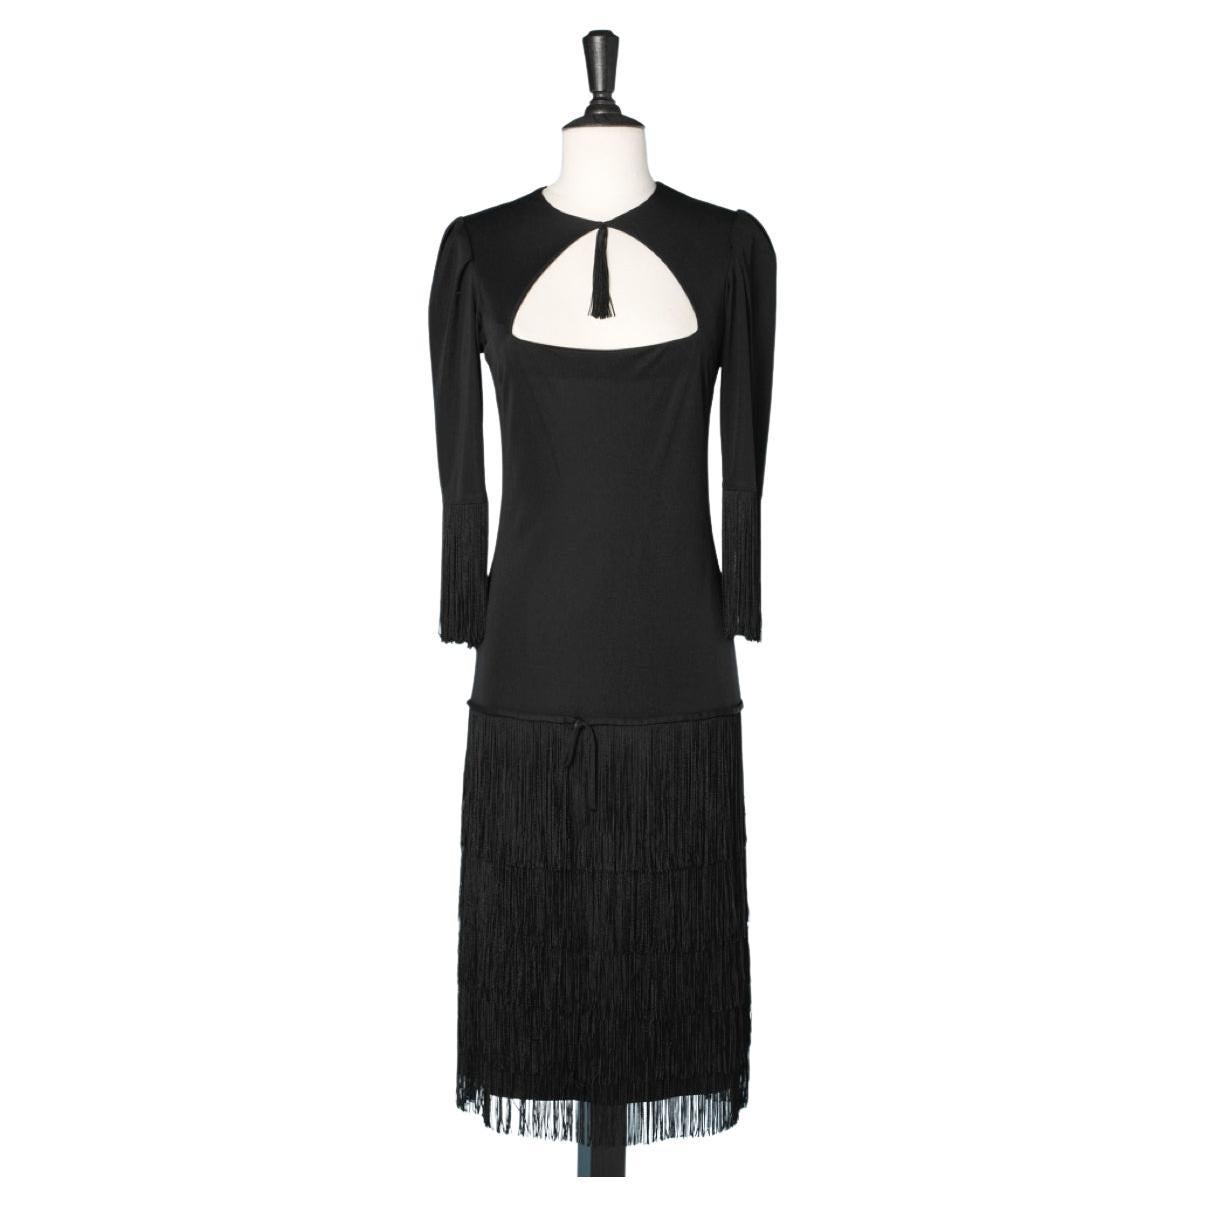 Black jersey cocktail dress with fringes Loris Azzaro 